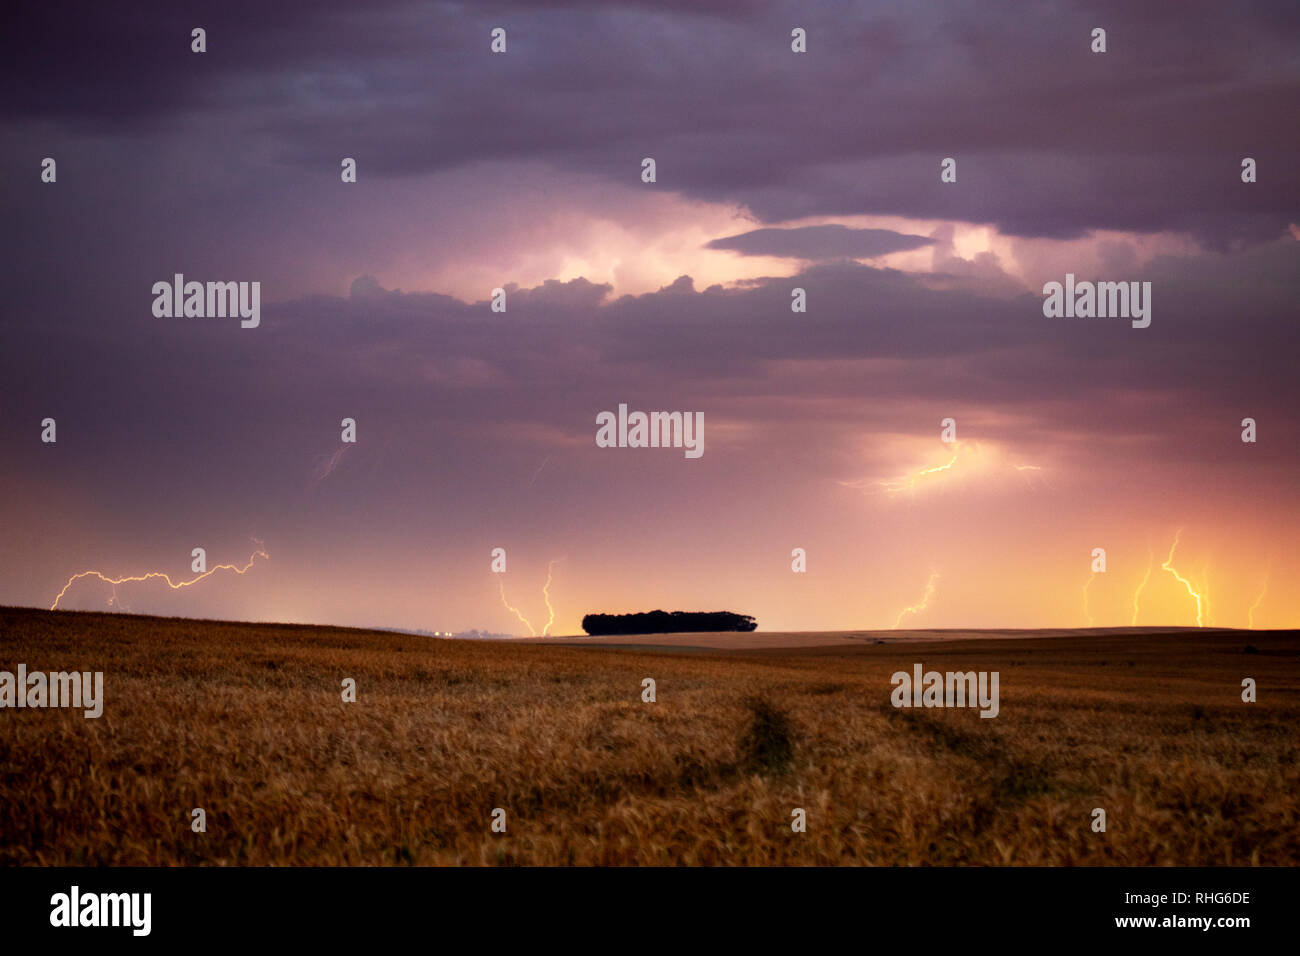 Lightning storm over farm field in Western Cape, South Africa Stock Photo